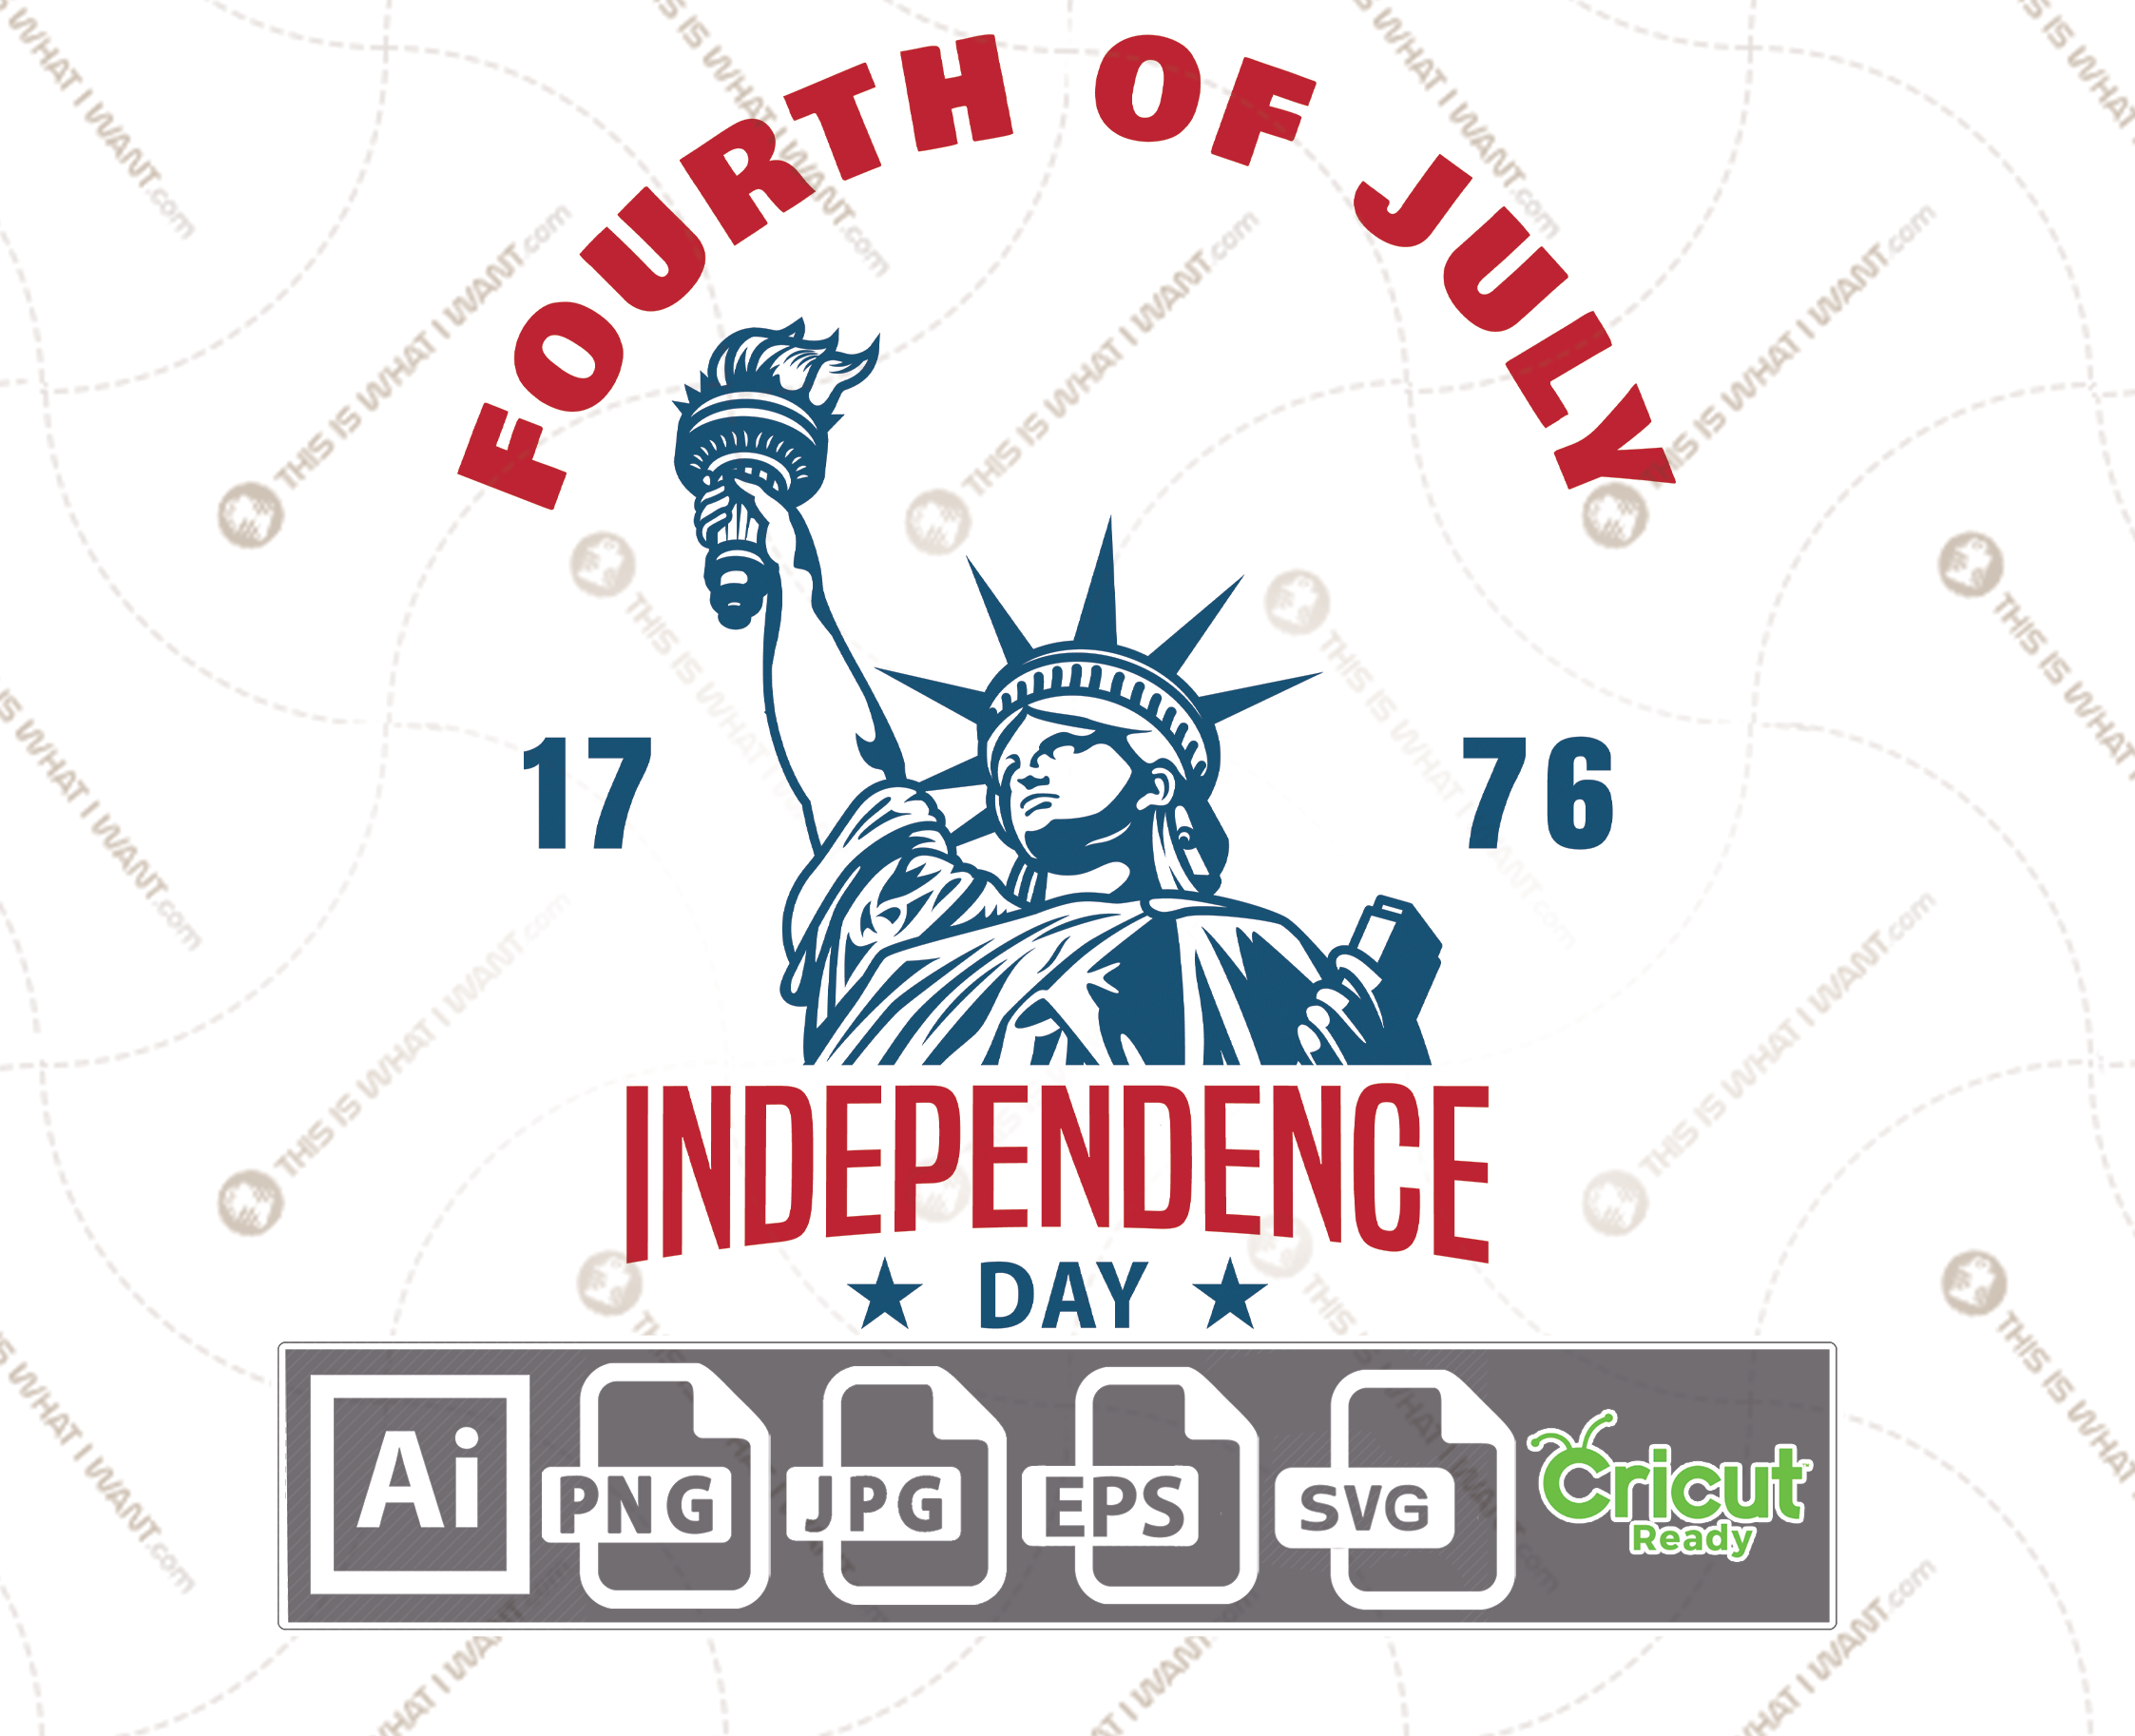 Download Independence Day With Statue of Liberty 1776, Print n Cut ...